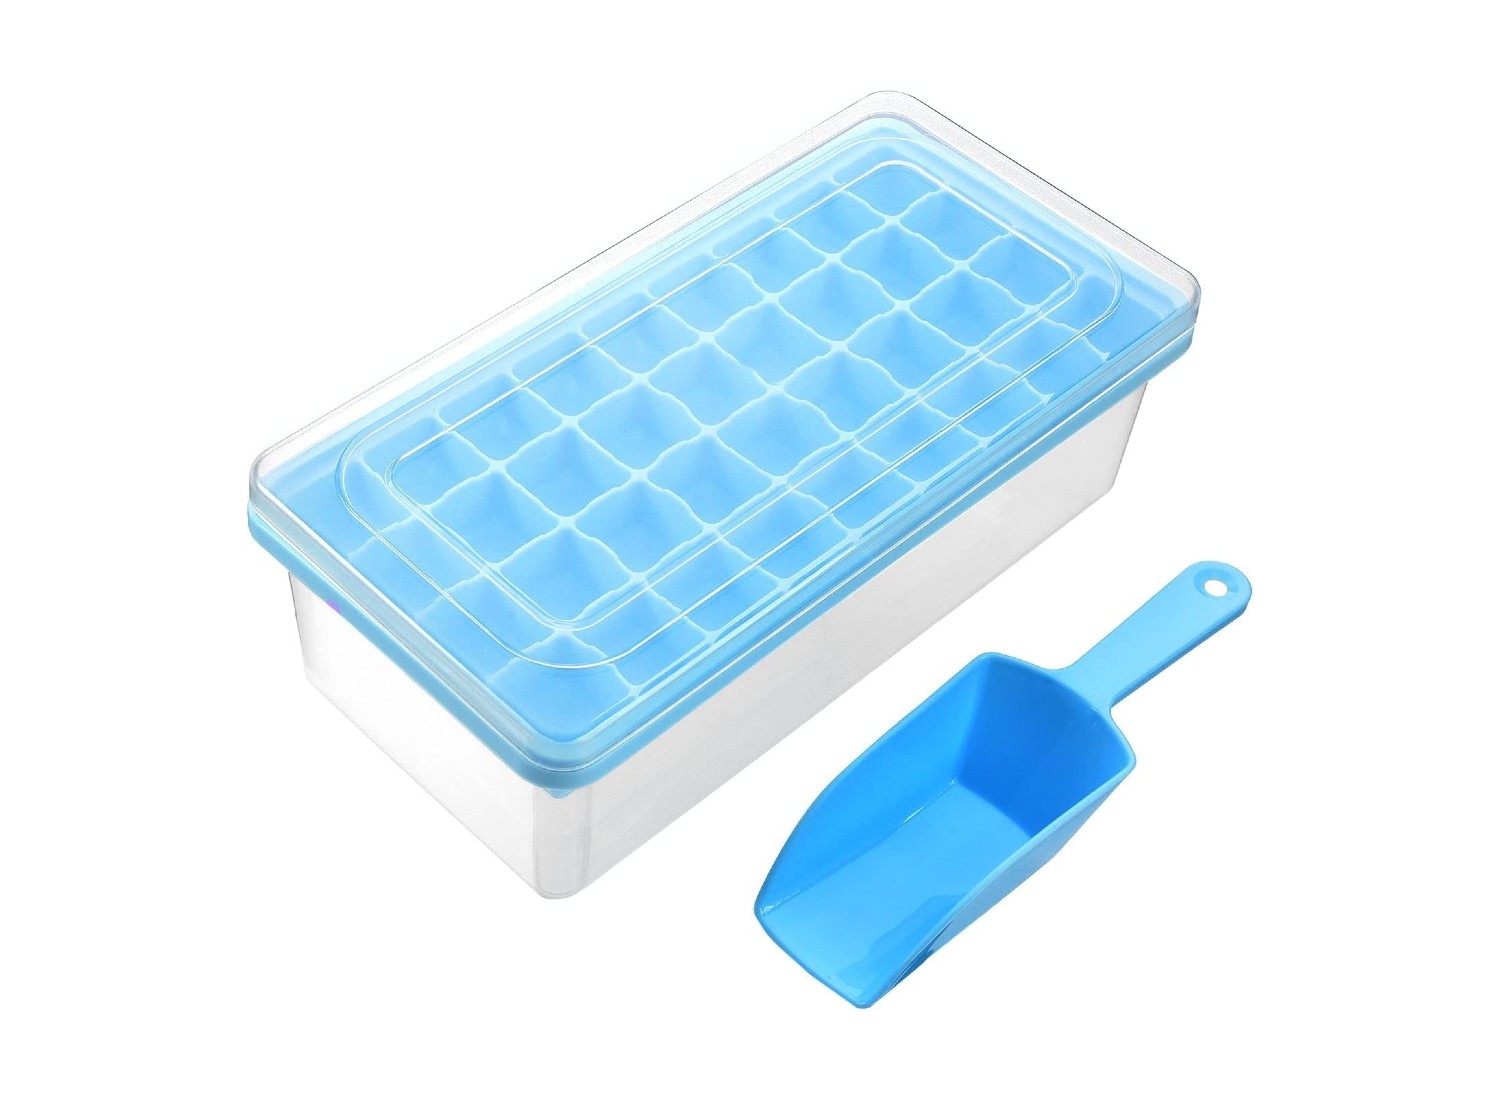 https://www.brit.co/reviews/wp-content/uploads/2023/05/yoove-ice-cube-trays-britco.jpg